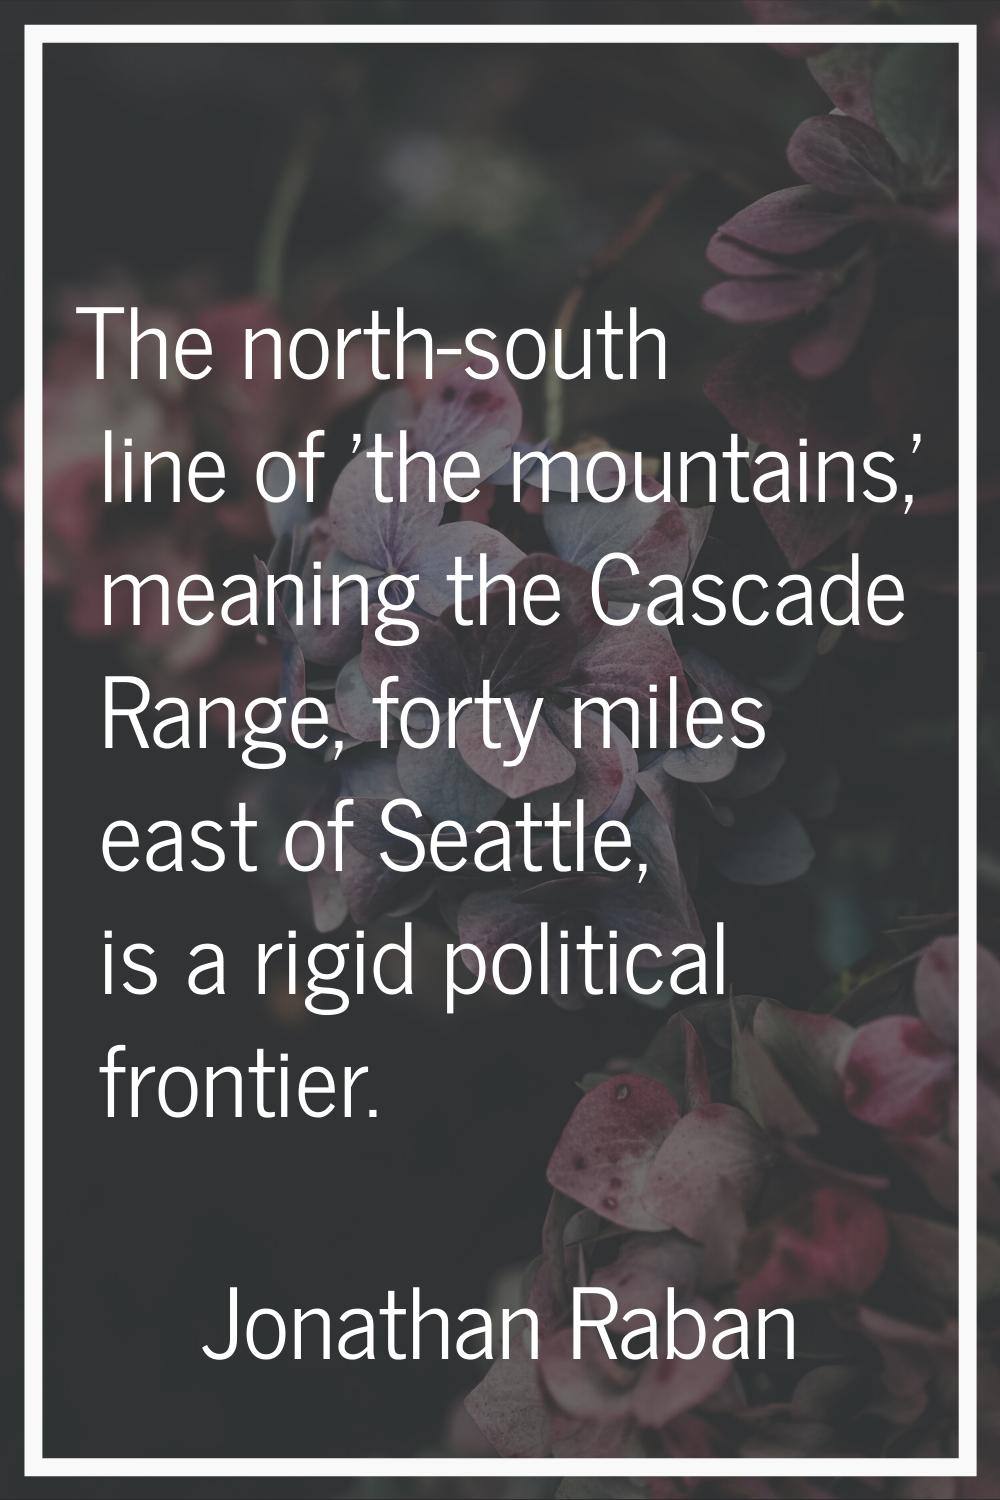 The north-south line of 'the mountains,' meaning the Cascade Range, forty miles east of Seattle, is